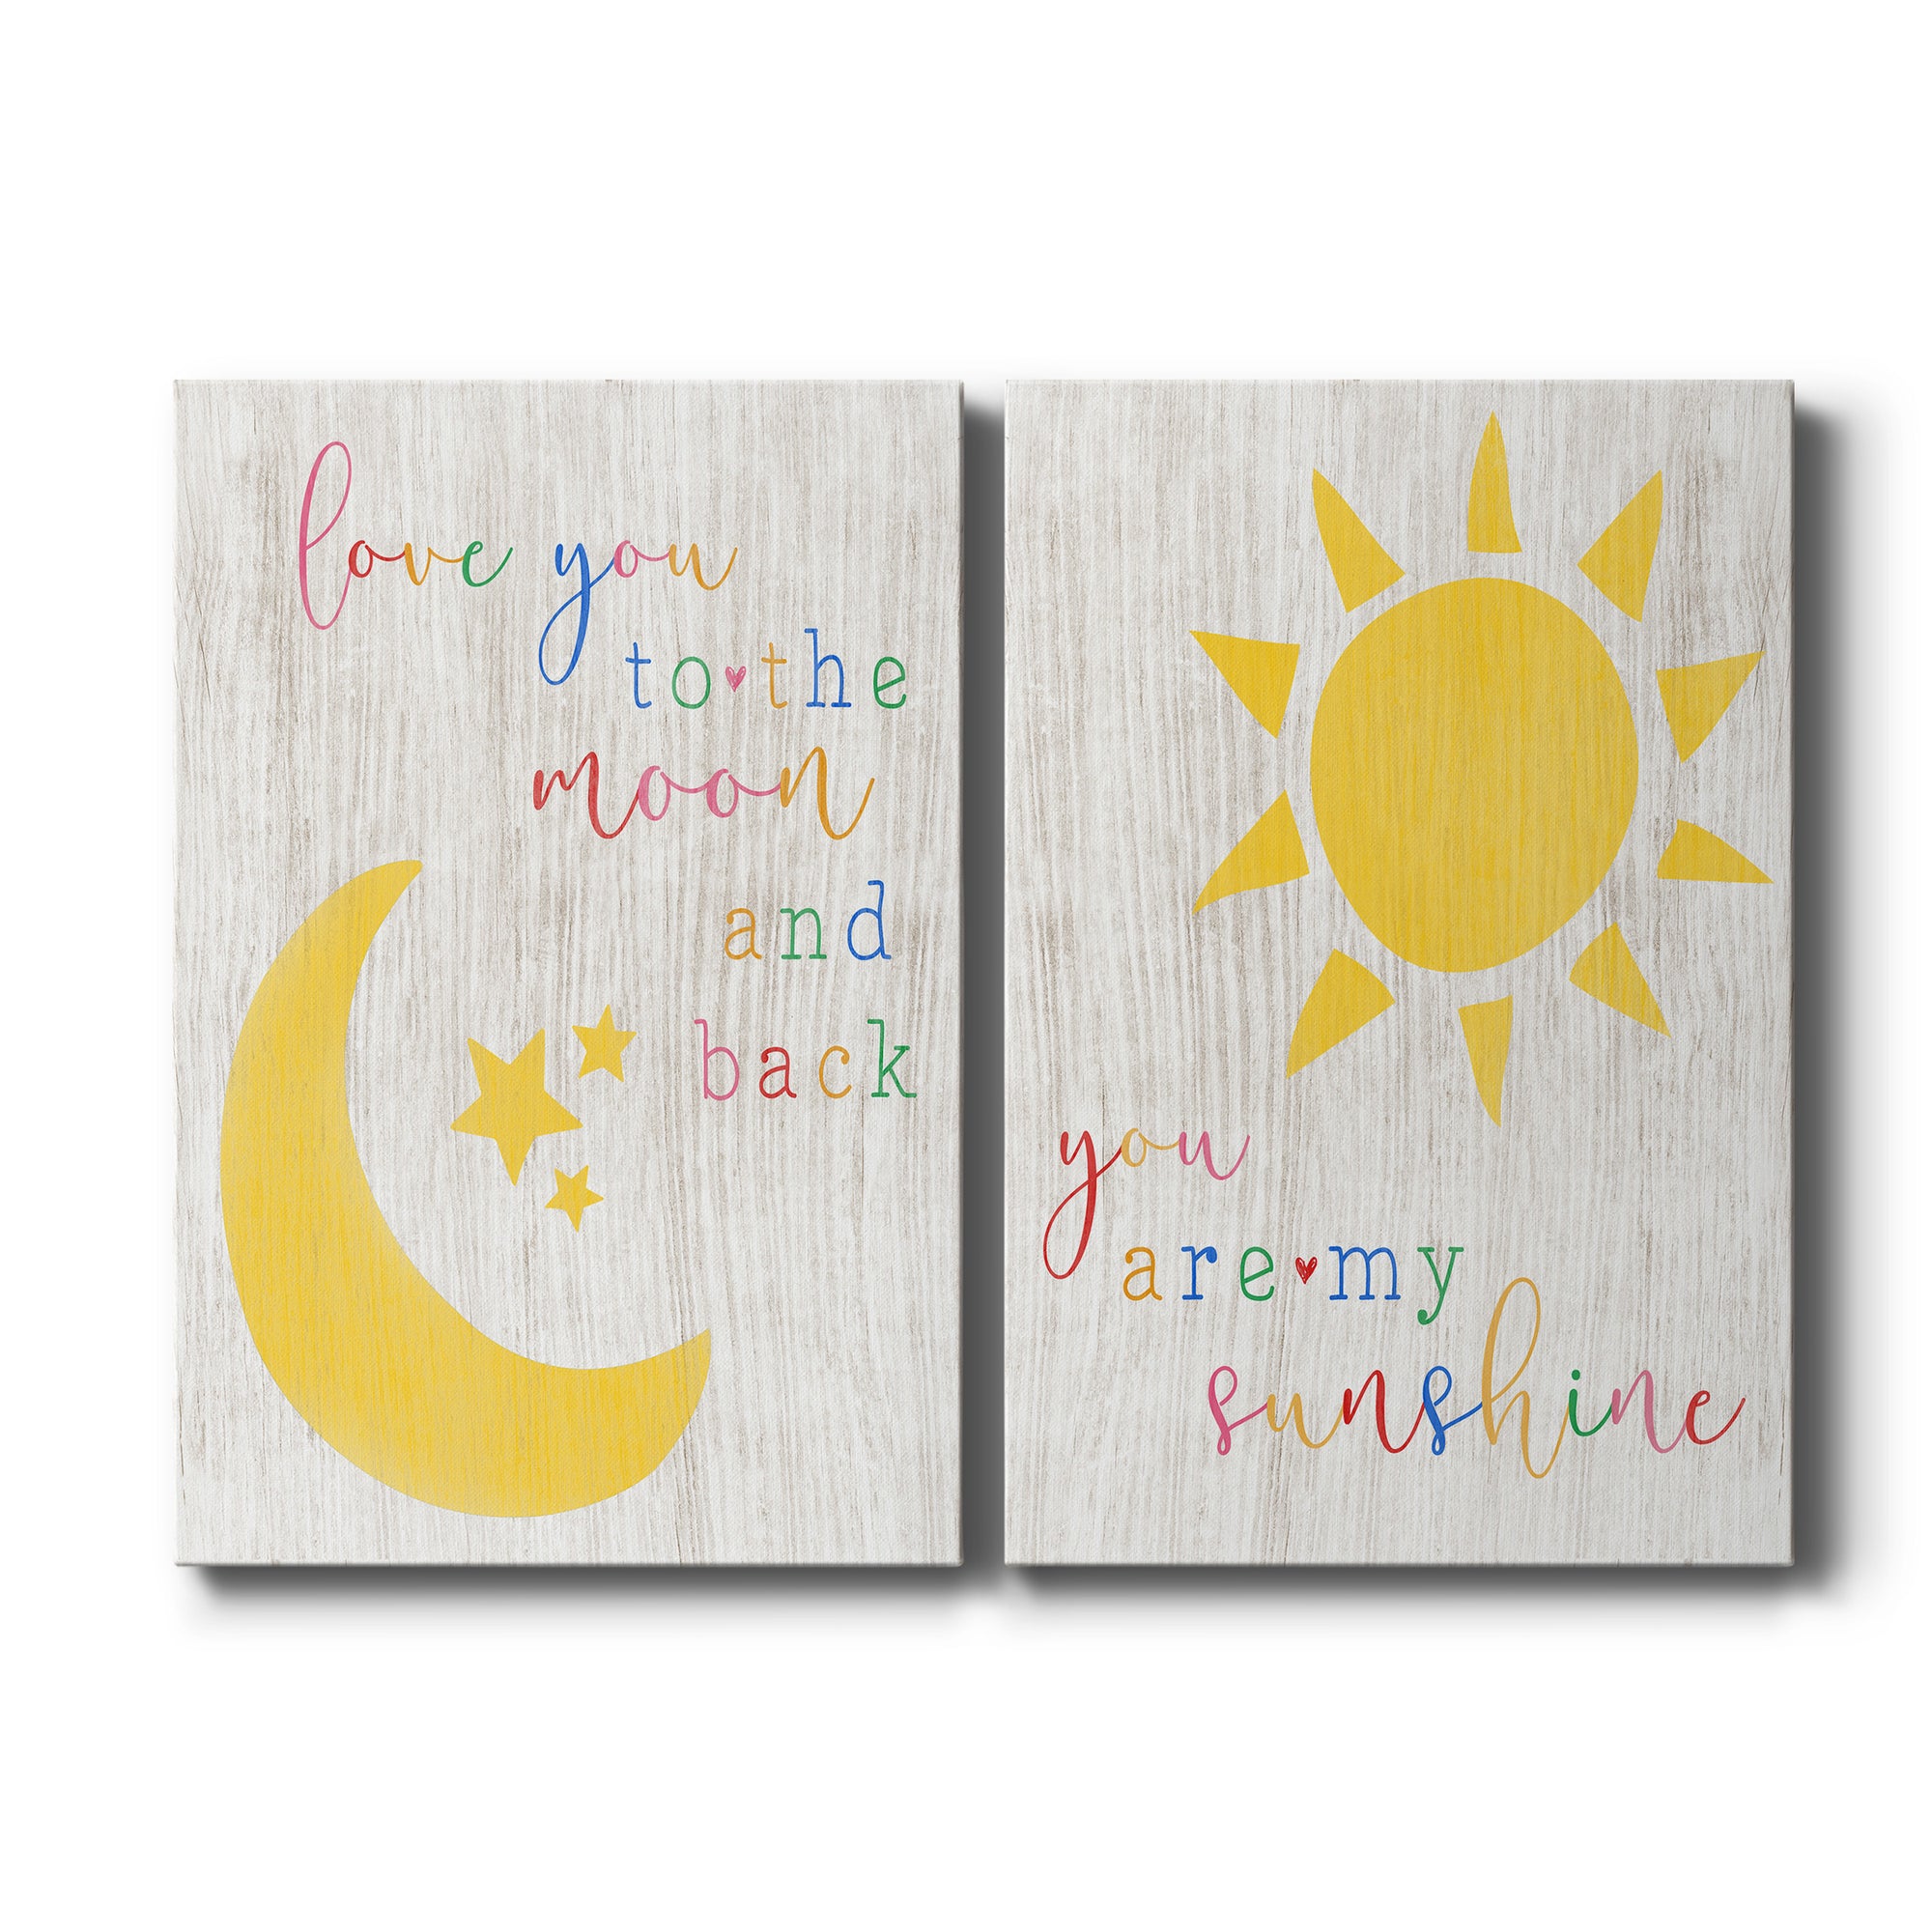 To the Moon and Back Premium Gallery Wrapped Canvas - Ready to Hang - Set of 2 - 8 x 12 Each